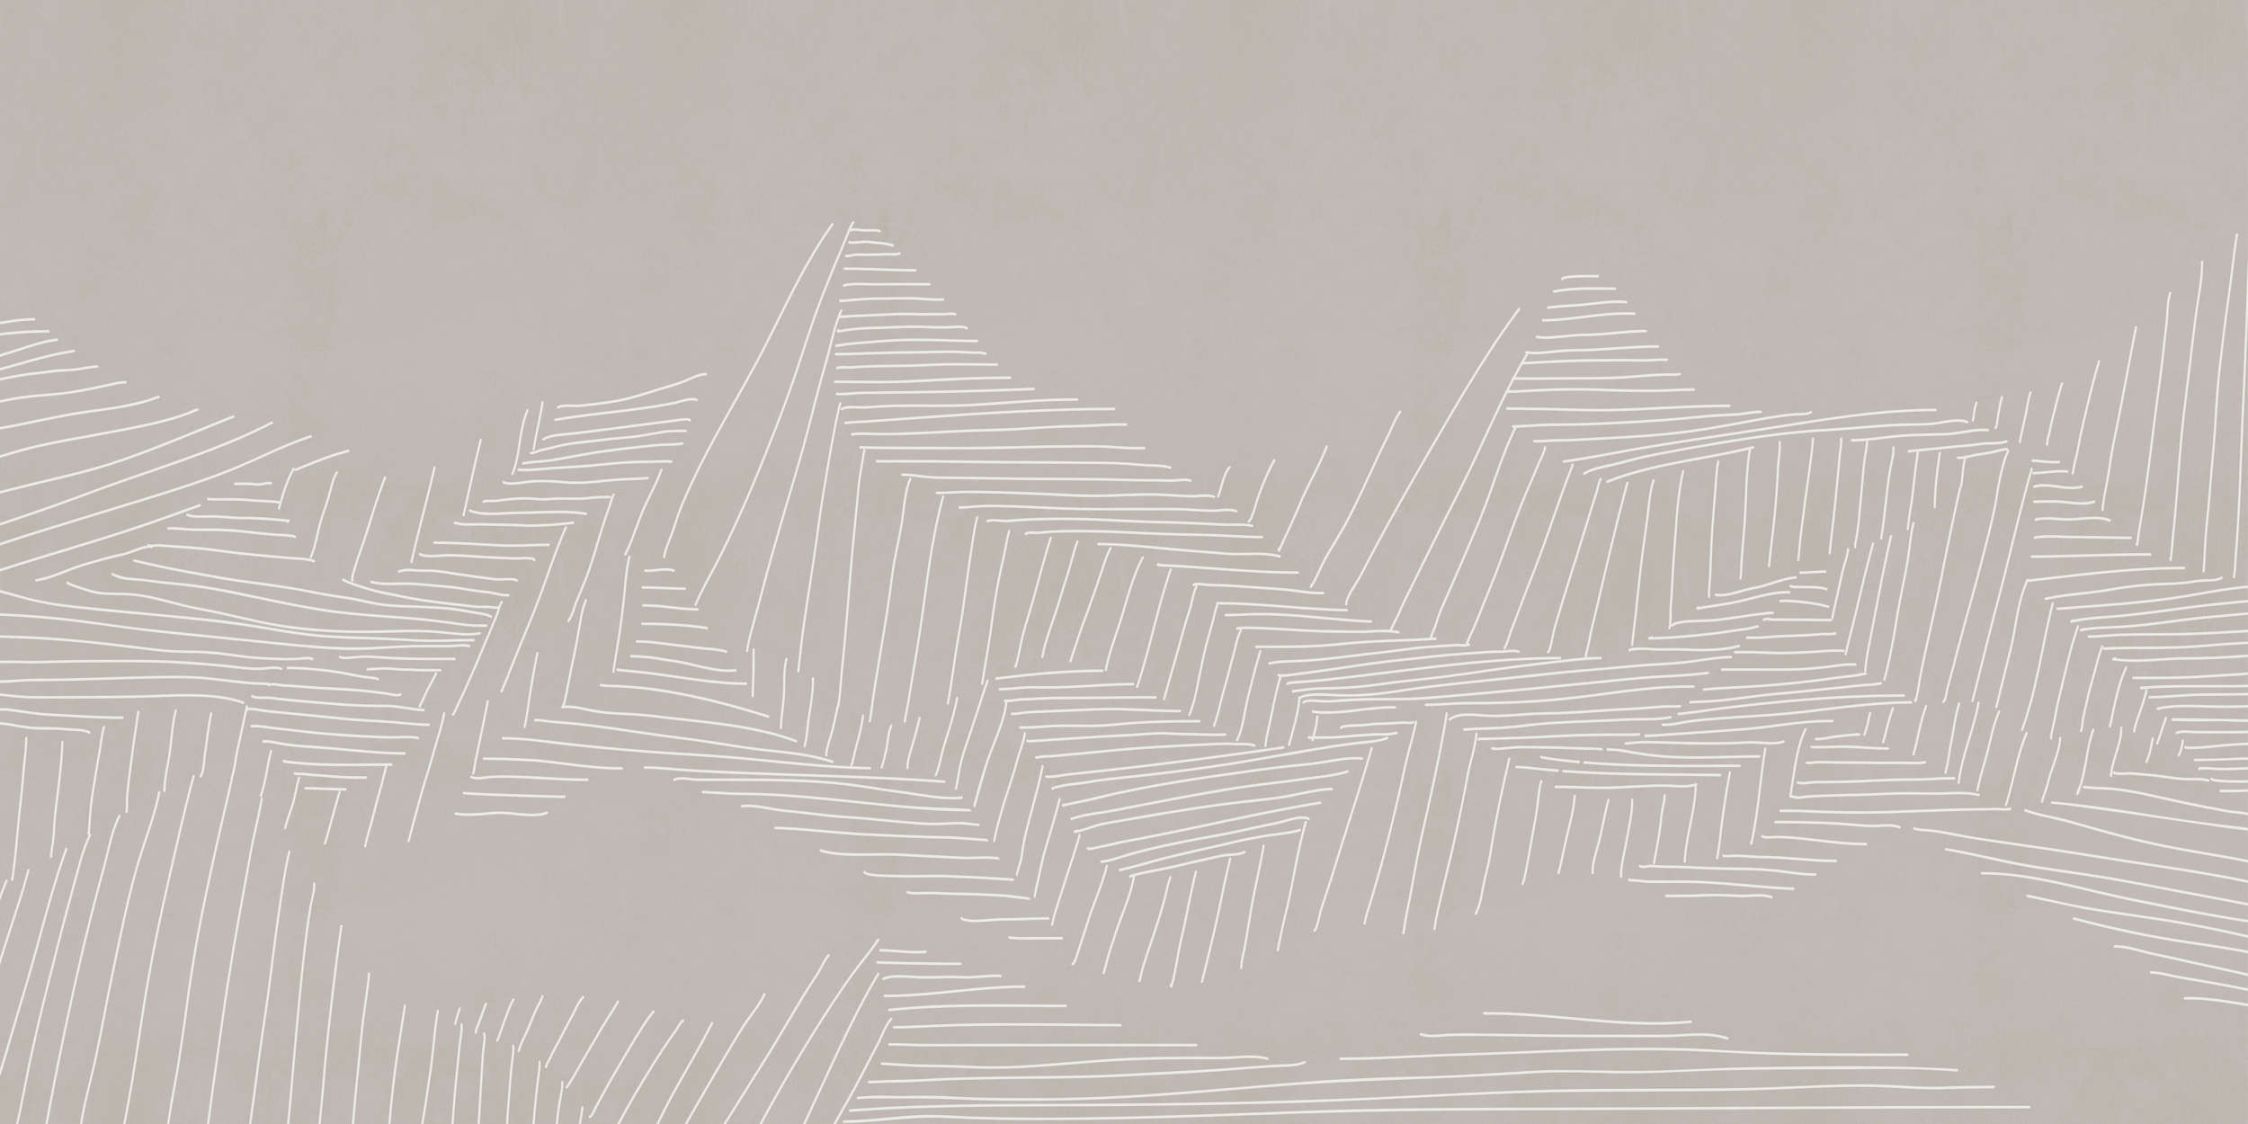             Photo wallpaper »victor« - Mountain landscape with line pattern - Grey | Smooth, slightly shiny premium non-woven fabric
        